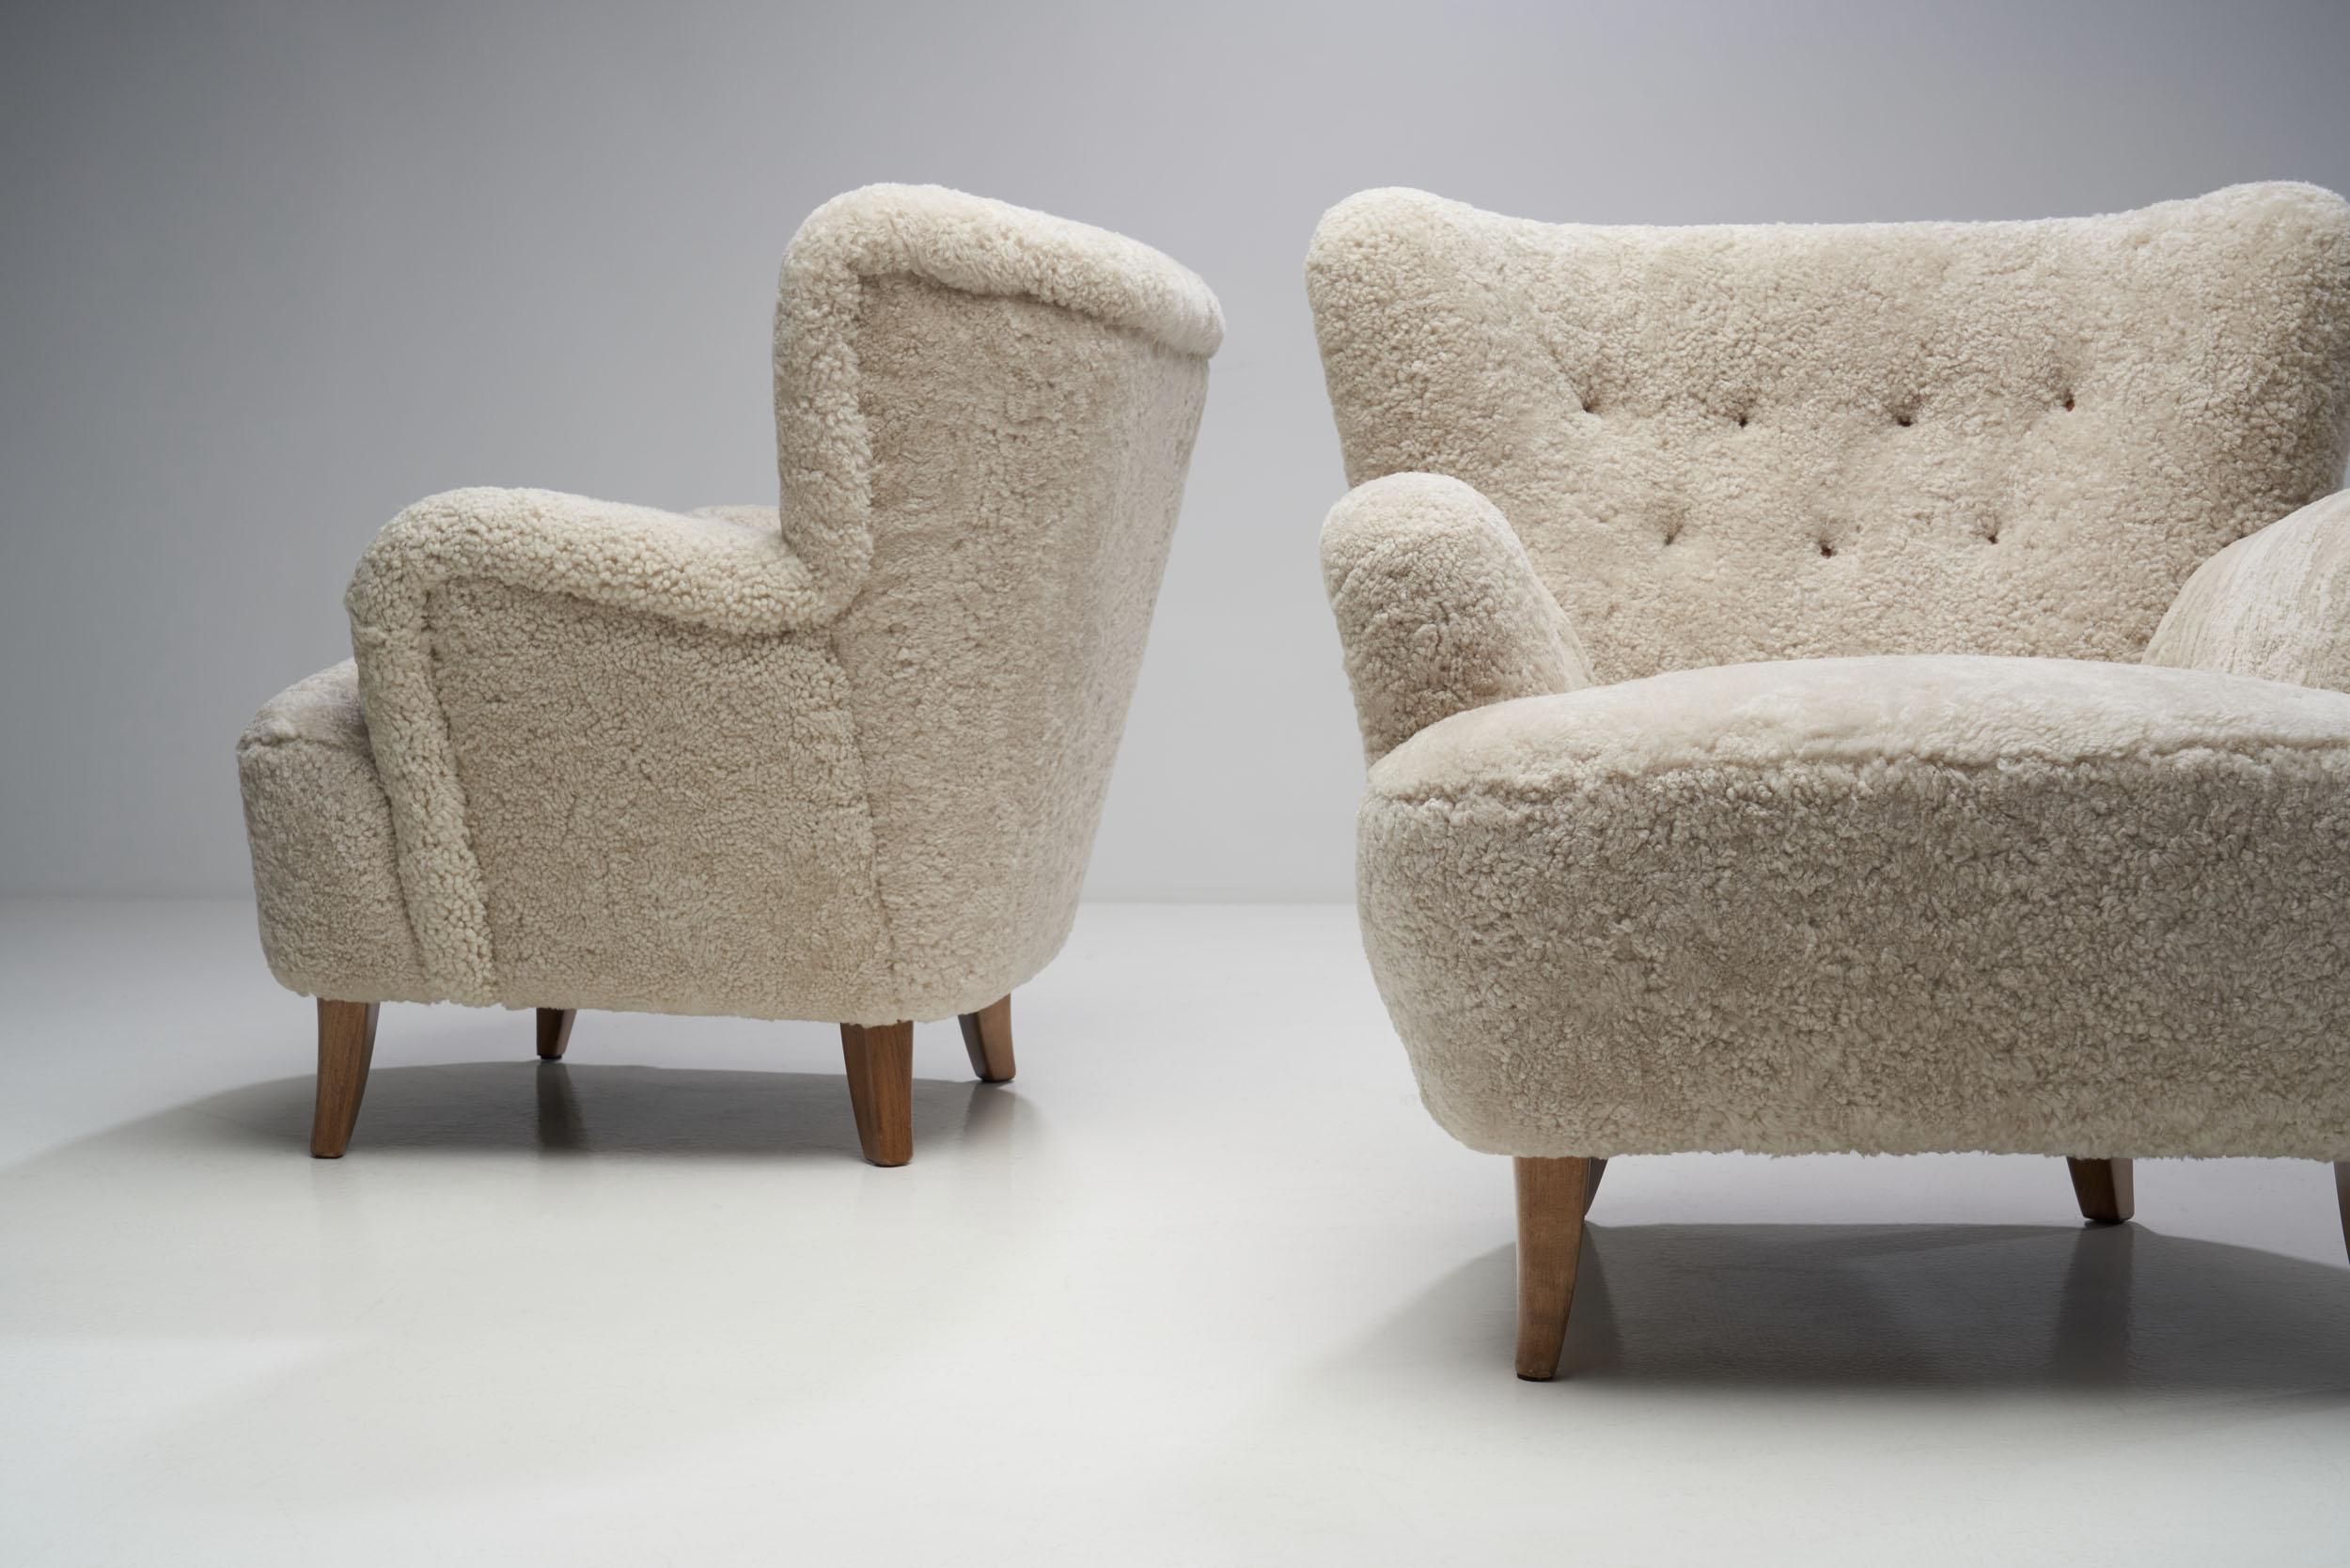 Pair of “Laila” Armchairs in Sheepskin by Ilmari Lappalainen, Finland 1948 For Sale 1